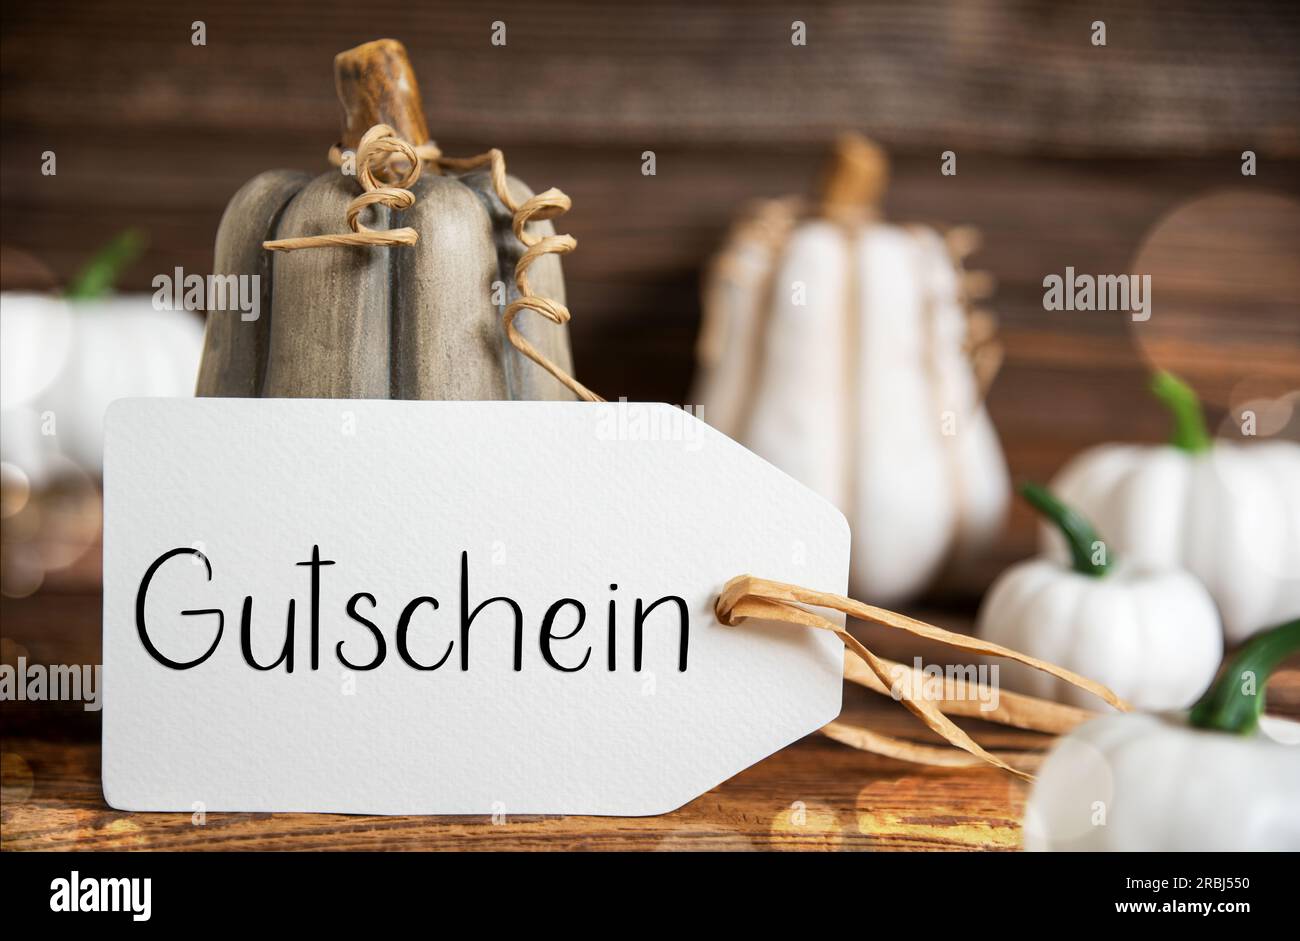 Autumn Decoration With Pumpkins, Rustic fall Decoration With Label With German Text Gutschein, Which Means Voucher in English Stock Photo